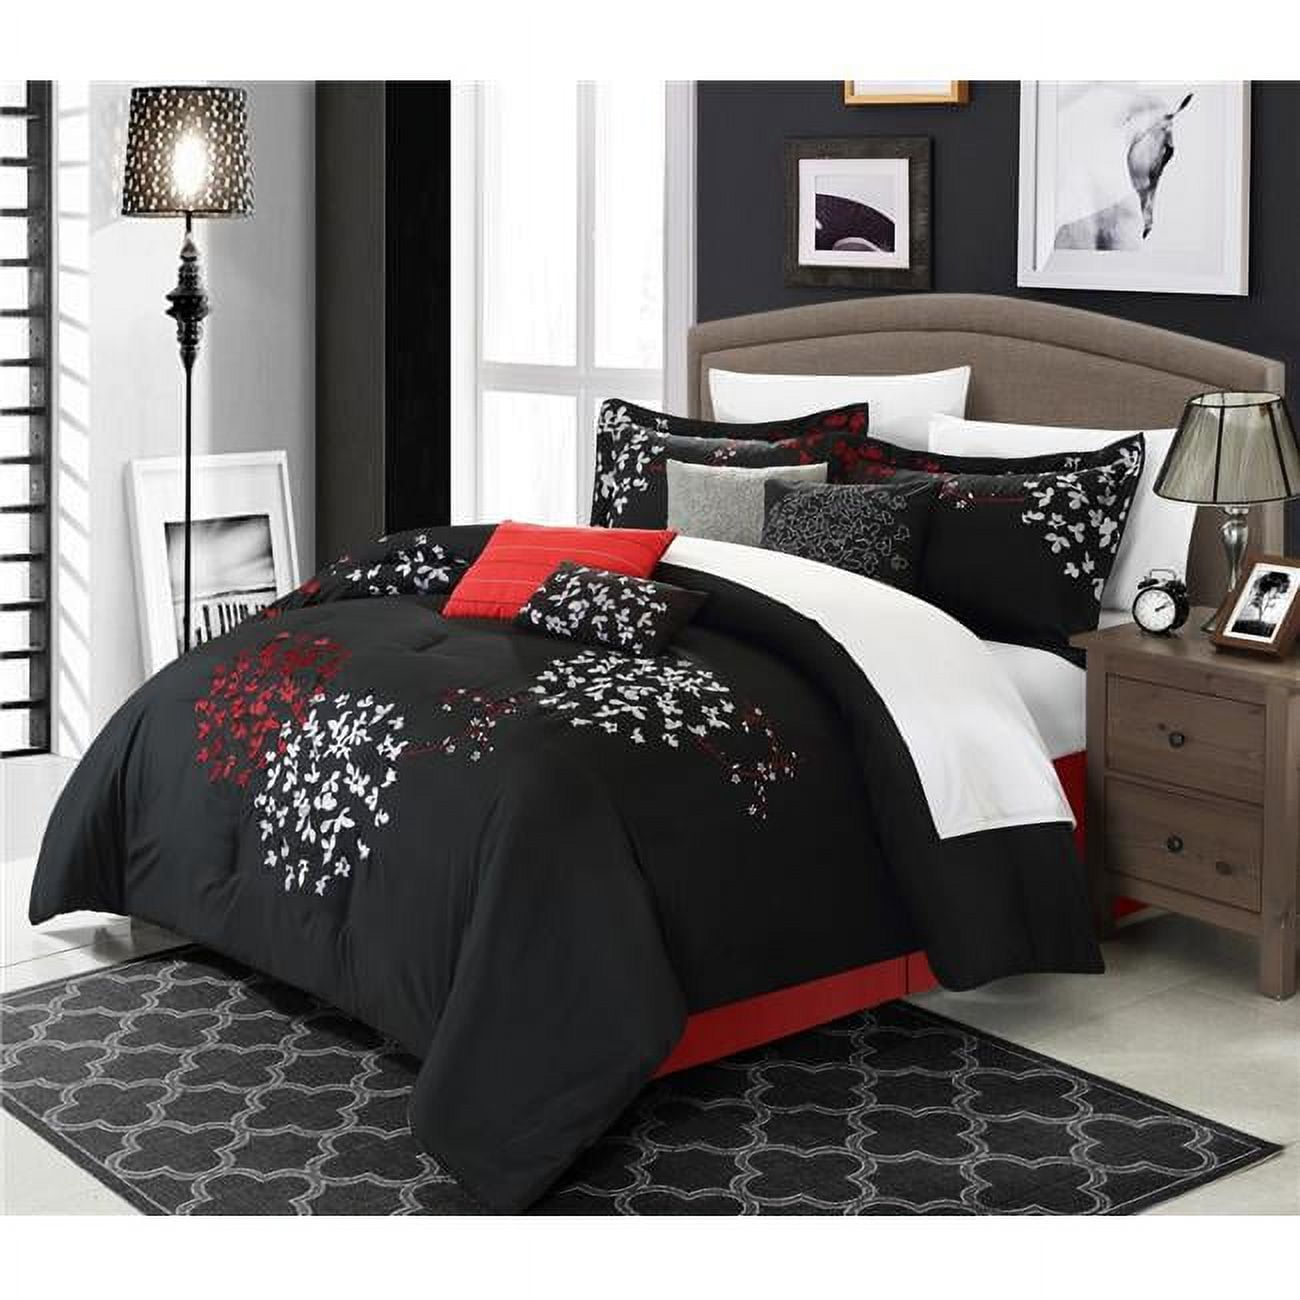 Elaina Oversized & Overfilled Heavy Embroidery Contemporary Comforter Set with Shams & Decorative Pillows - King - 8 Piece